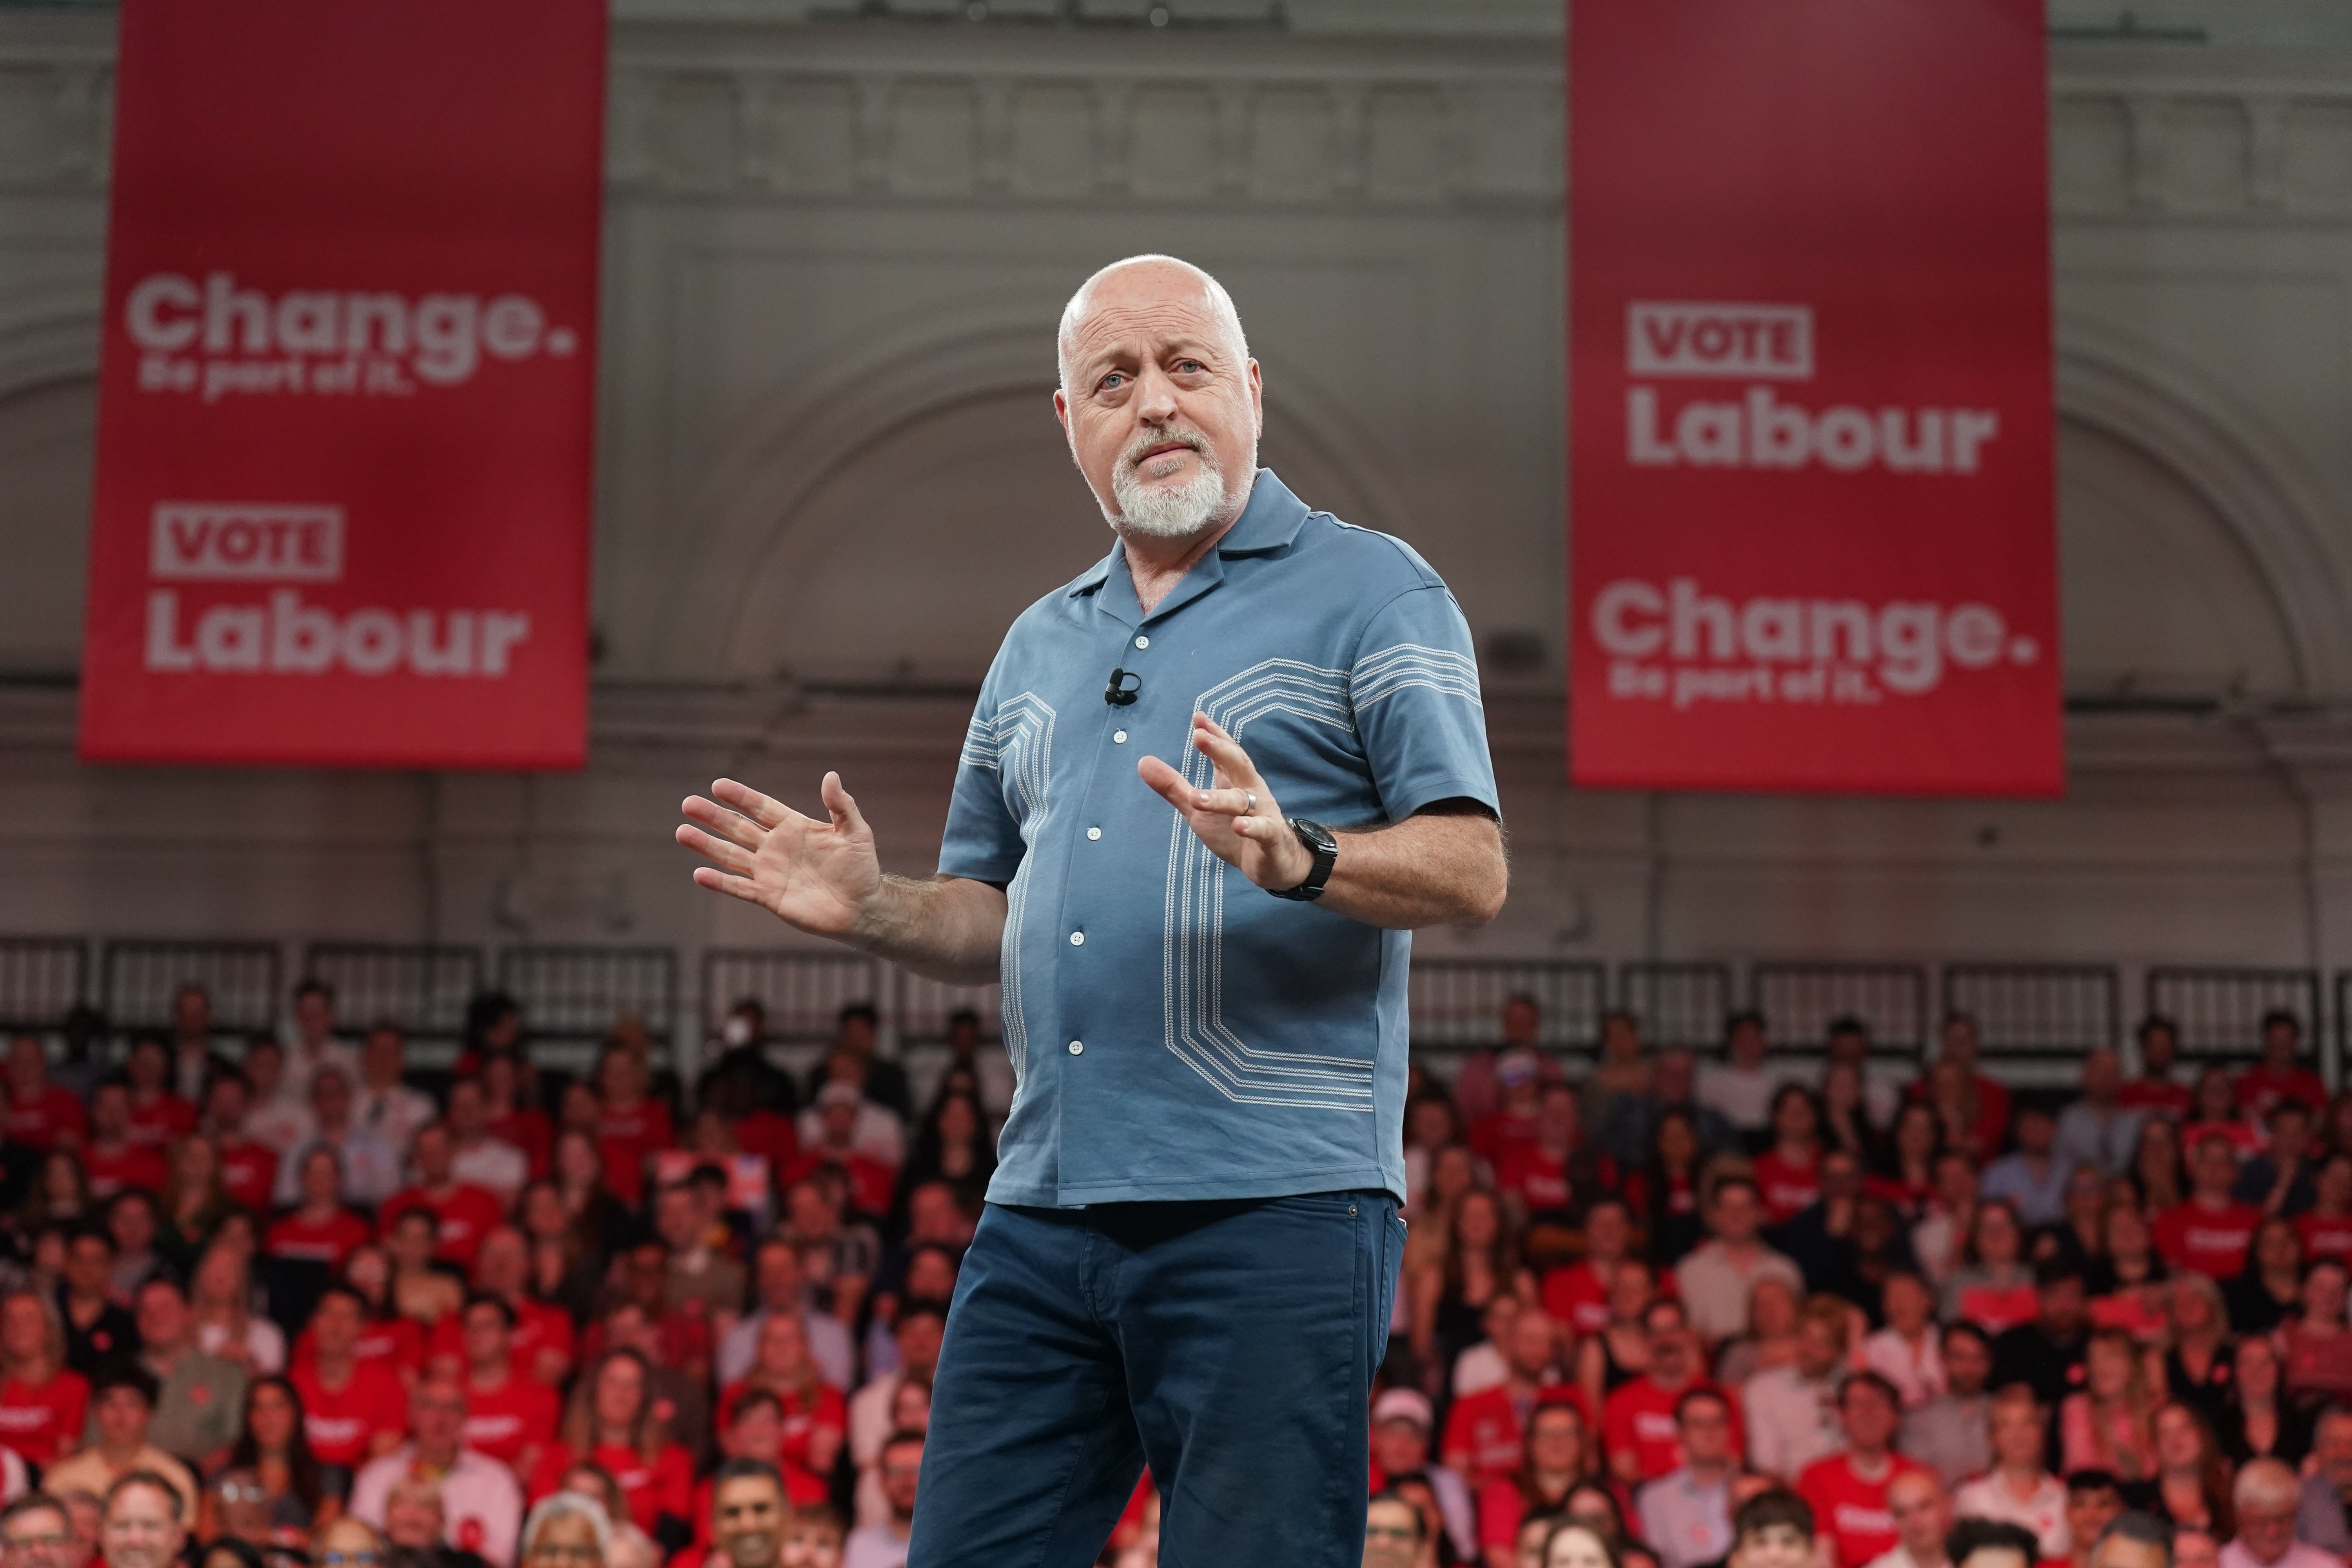 Musician and comedian Bill Bailey spoke at the Labour party rally and several celebrities voiced their support via video (Stephane Rousseau/PA)